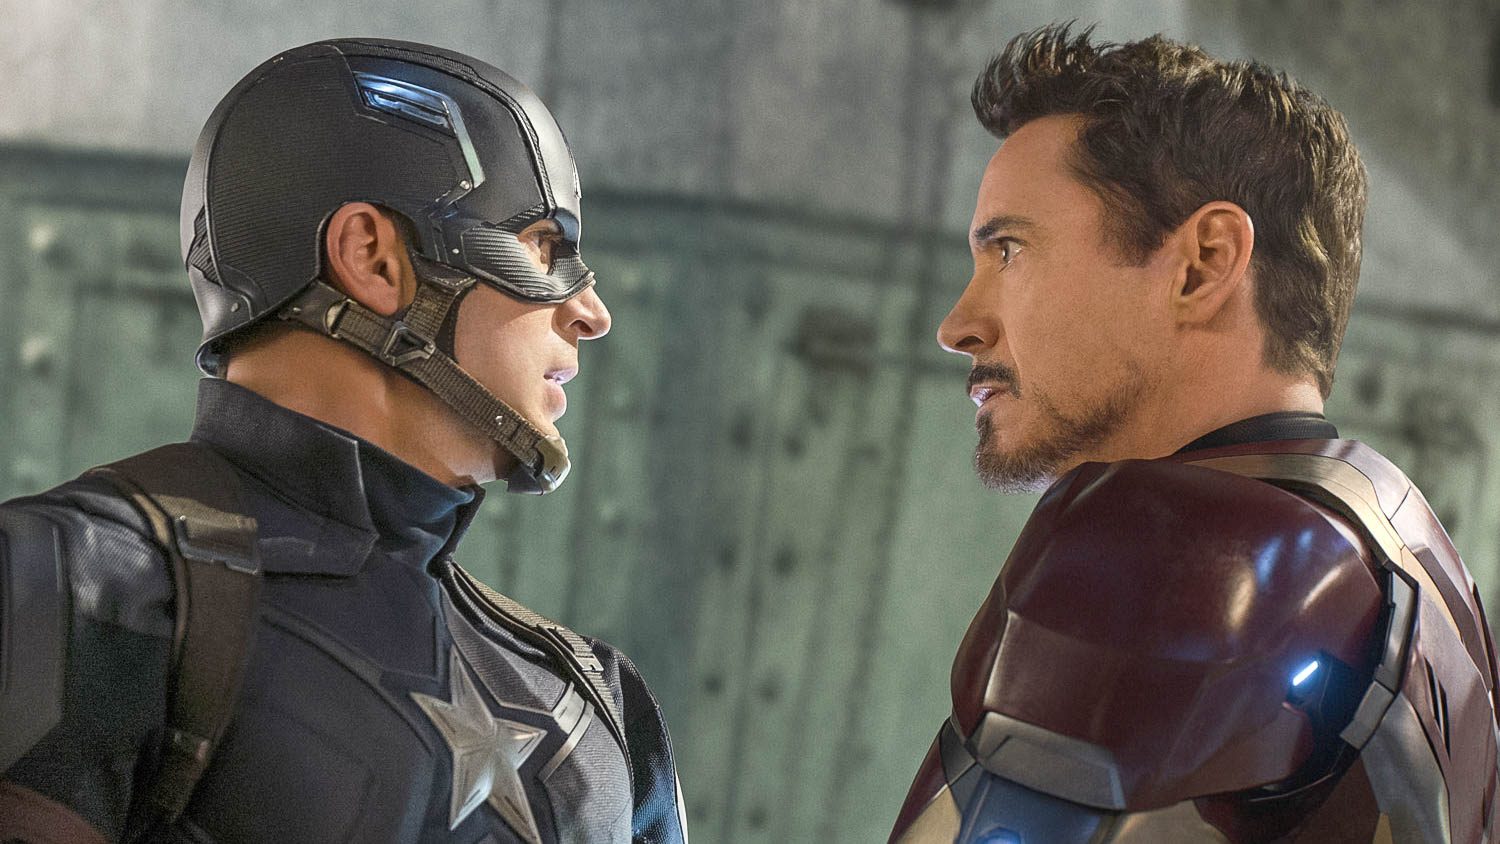 ‘Captain America: Civil War’ review: Entertainment worth fighting for